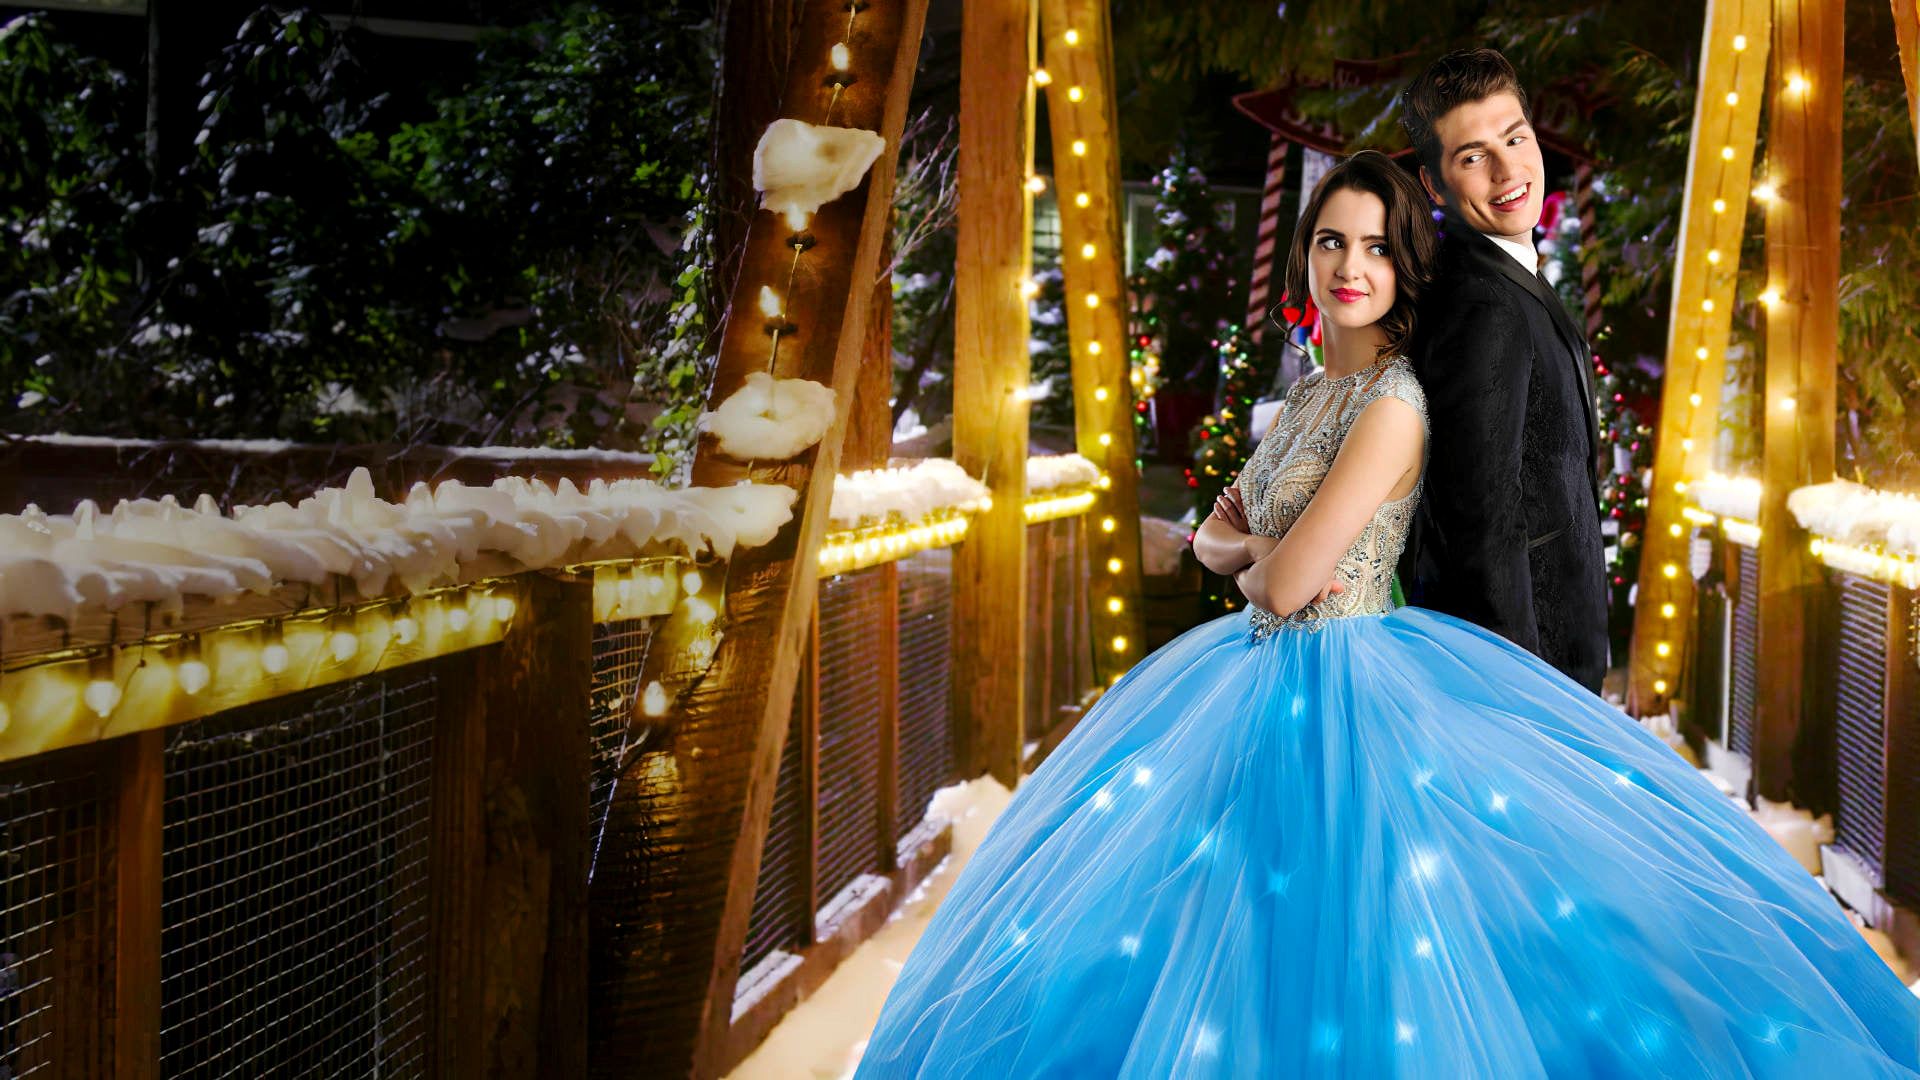 A Cinderella Story: Christmas Wish background